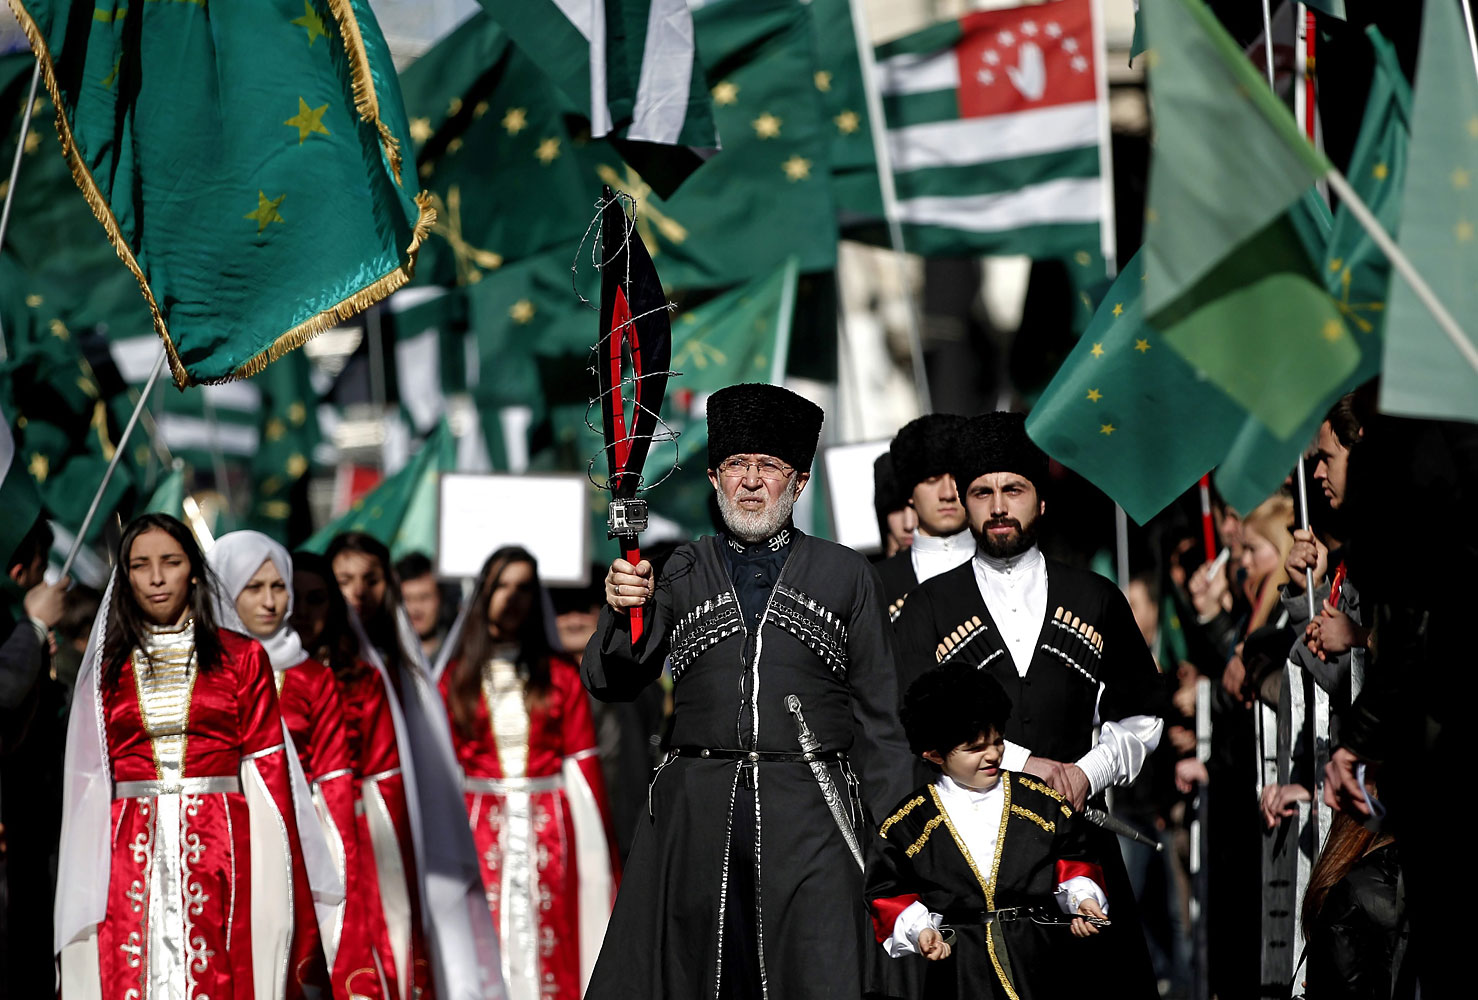 Circassians protest in Turkey against Olympic Games 2014 in Sochi